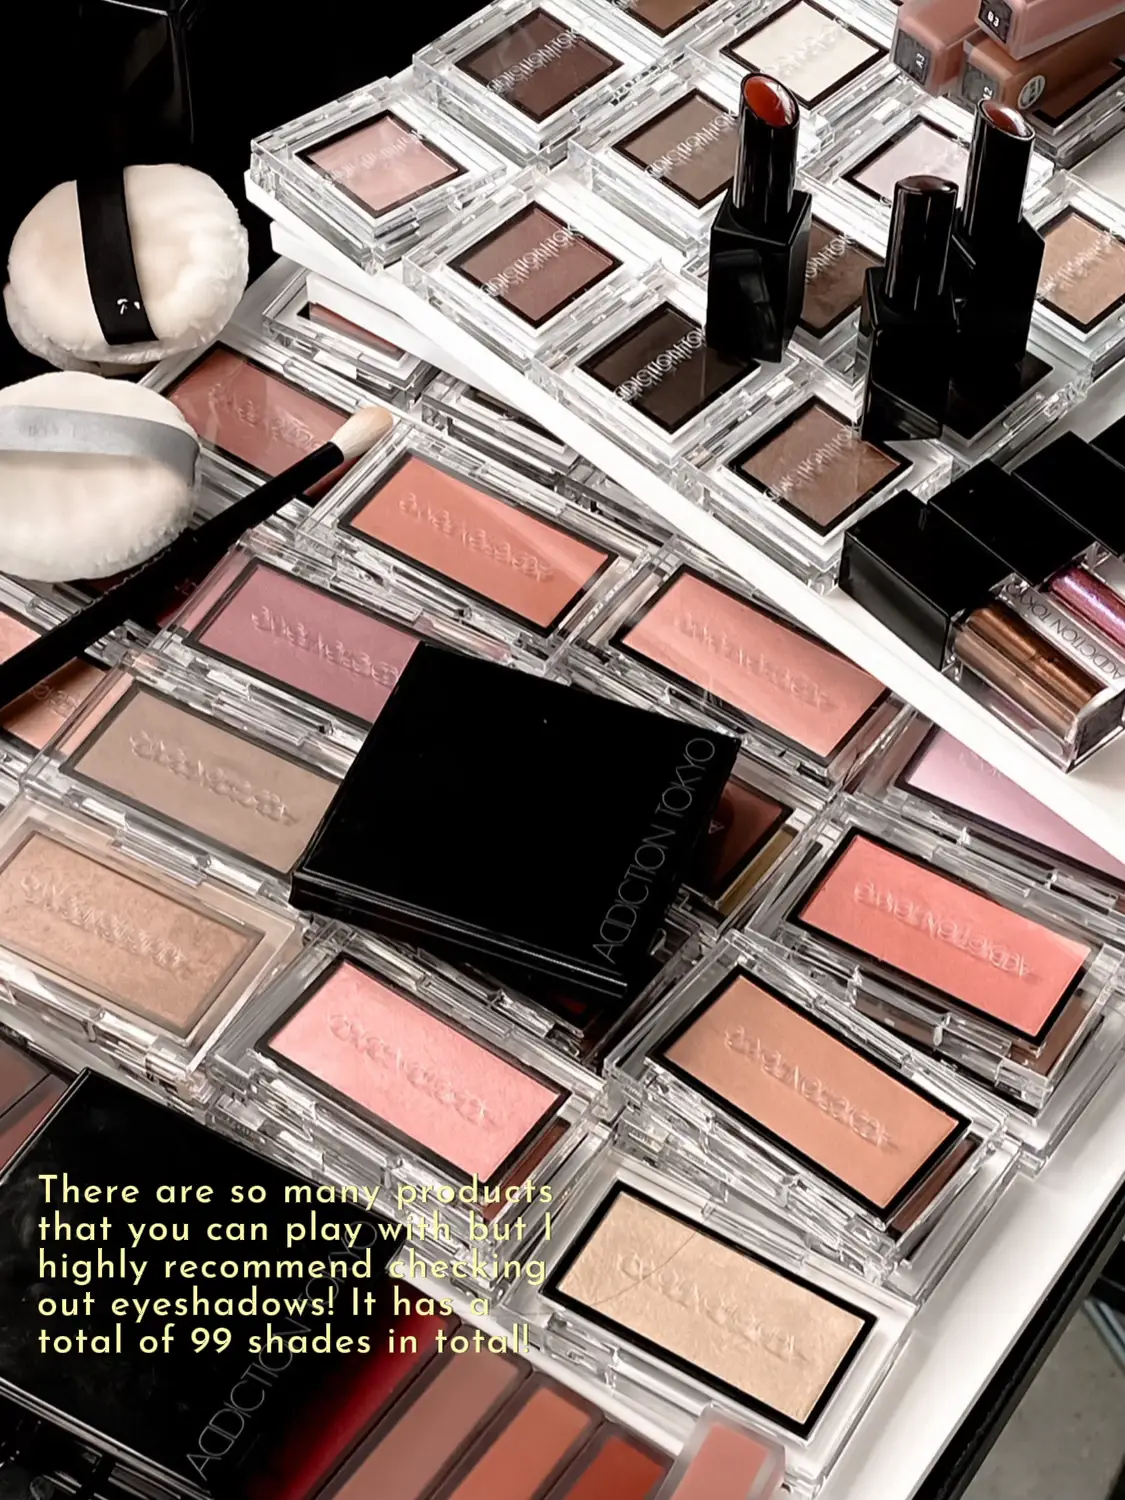 Building My Fall Makeup Wardrobe: The Chanel Blurry Grey Quad - Makeup and  Beauty Blog